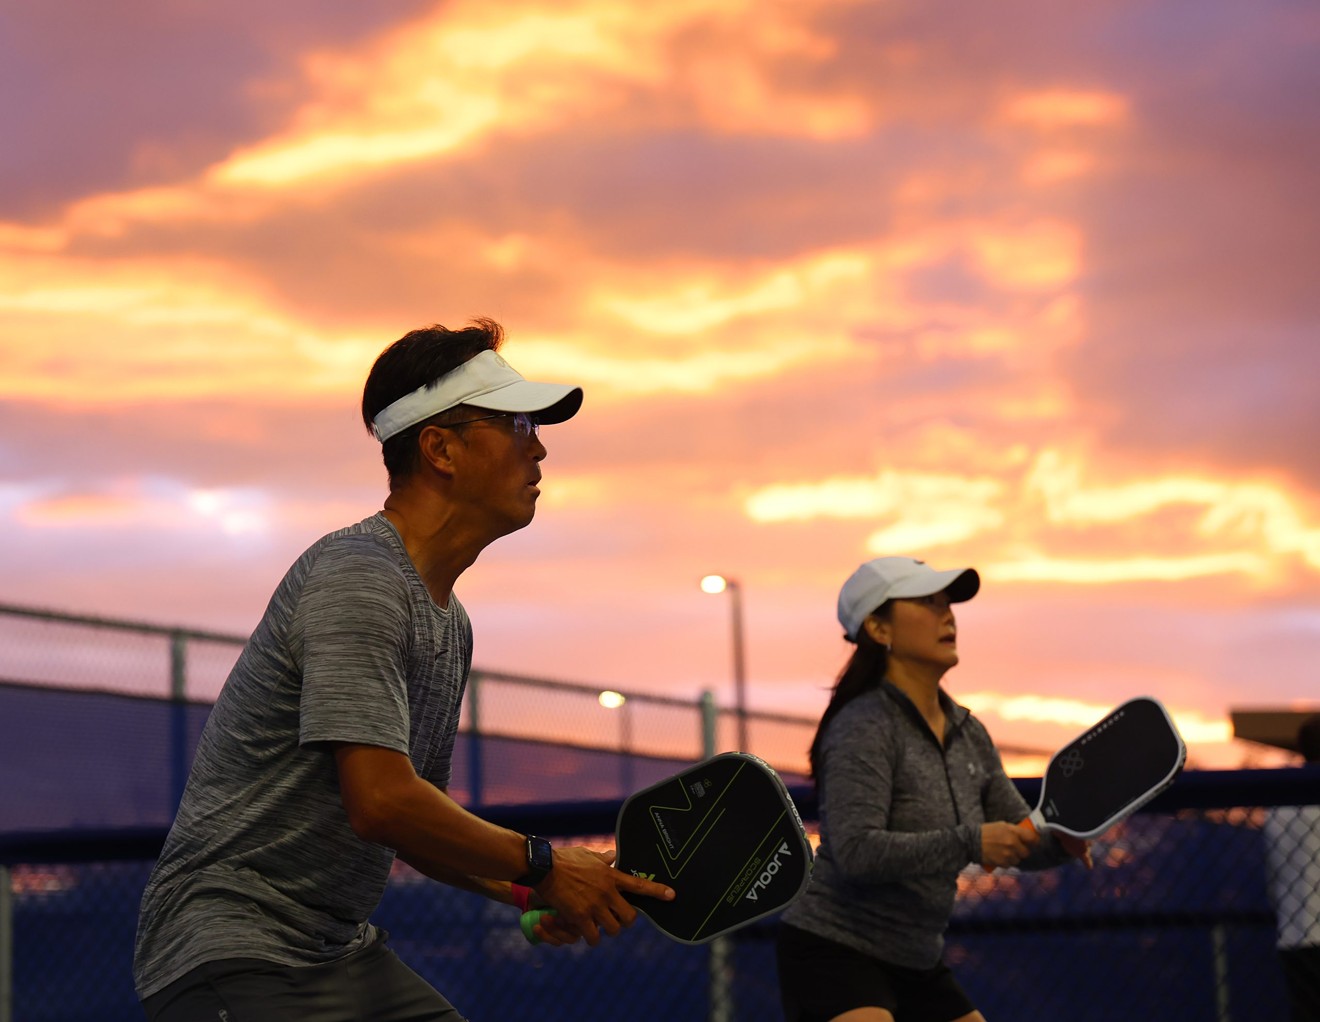 Pickball players like Dan Shin, left, and his wife, Theresa, can play in competitive matches until 10 p.m. at Gilbert Regional Park.